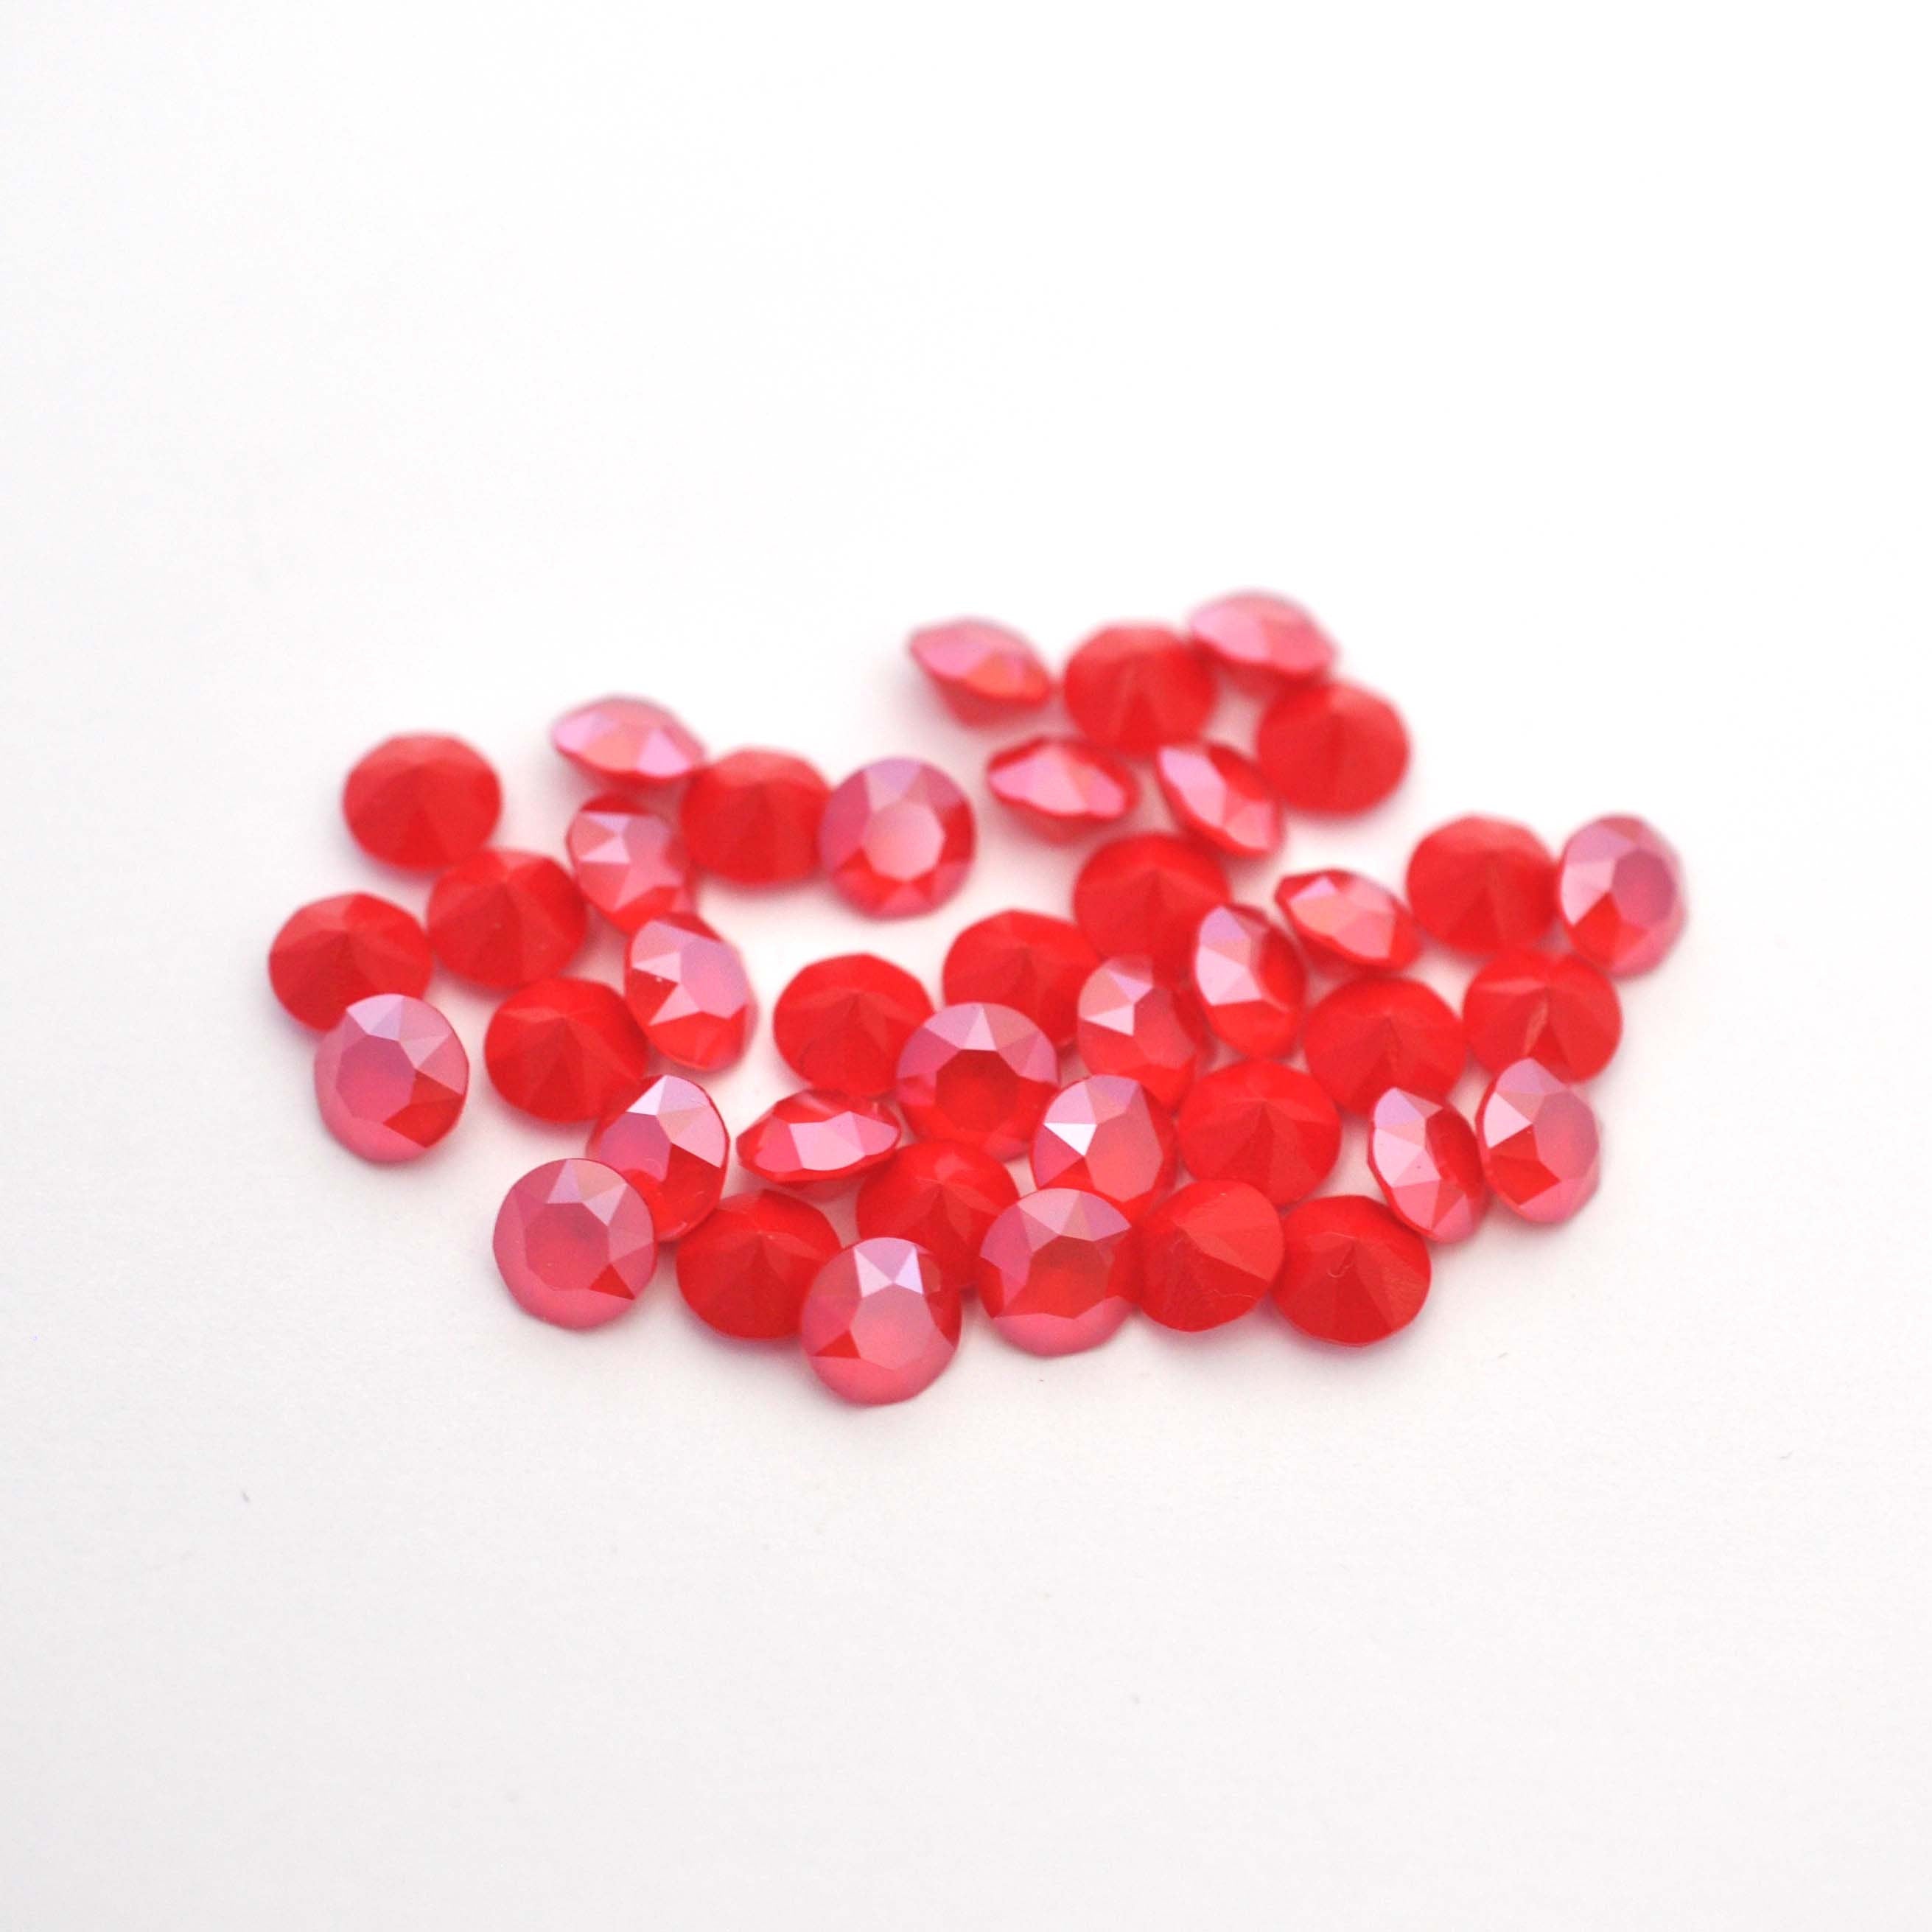 Royal Red 1088 Pointed Back Chaton Barton Crystal 29ss, 6mm